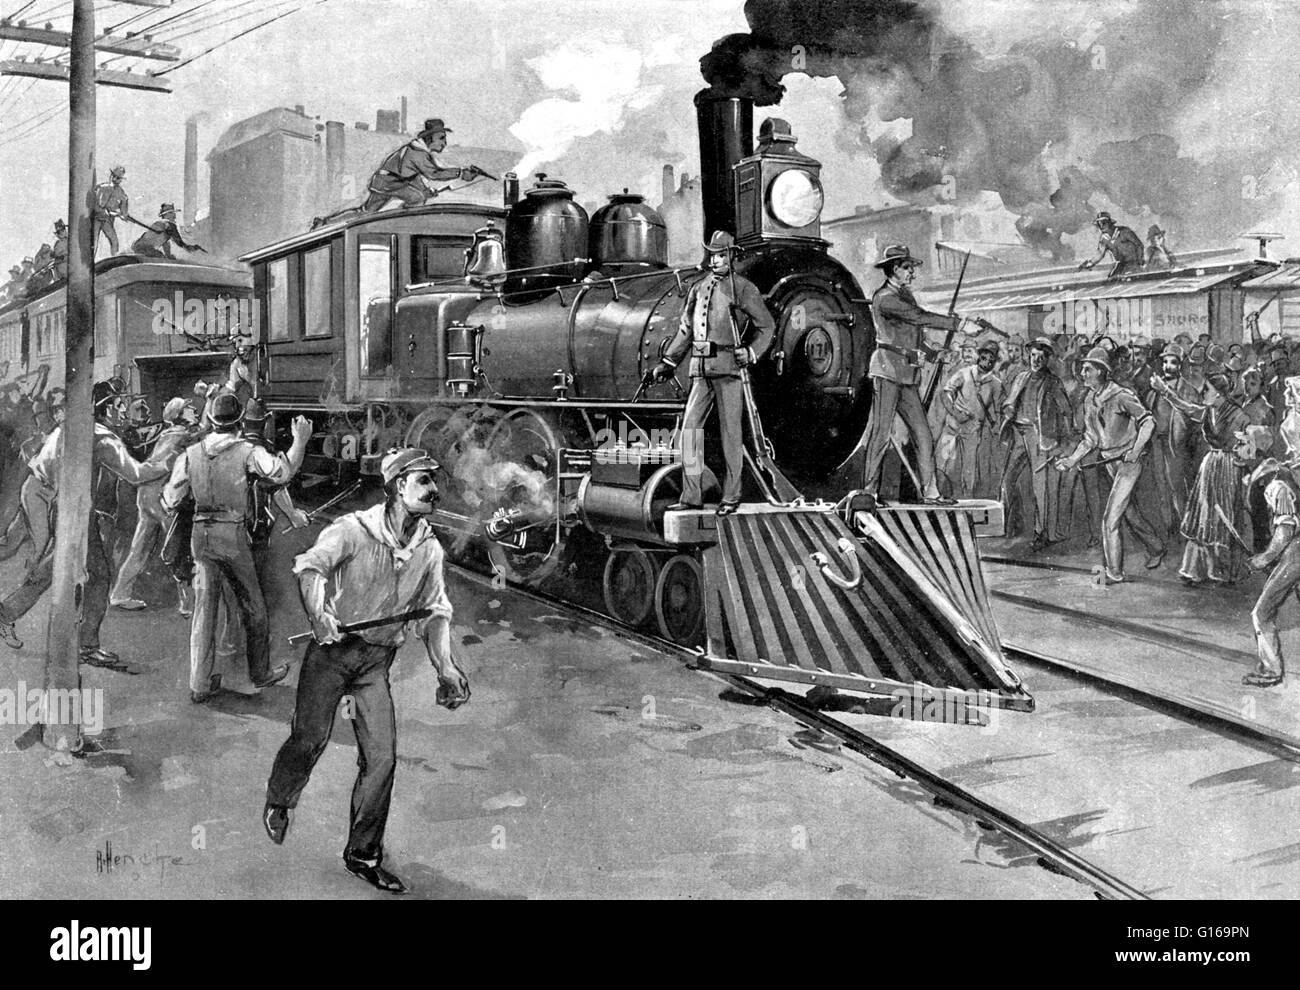 The Pullman Strike was a nationwide conflict in the summer of 1894 between the new American Railway Union (ARU) and railroads that occurred in the United States. It shut down much of the nation's freight and passenger traffic west of Detroit, Michigan. The conflict began in the town of Pullman, Illinois, on May 11 when nearly 4,000 employees of the Pullman Palace Car Company began a wildcat strike in response to recent reductions in wages. Most factory workers who built Pullman cars lived in the planned worker community of Pullman. When his company laid off workers and lowered wages, it did no Stock Photo